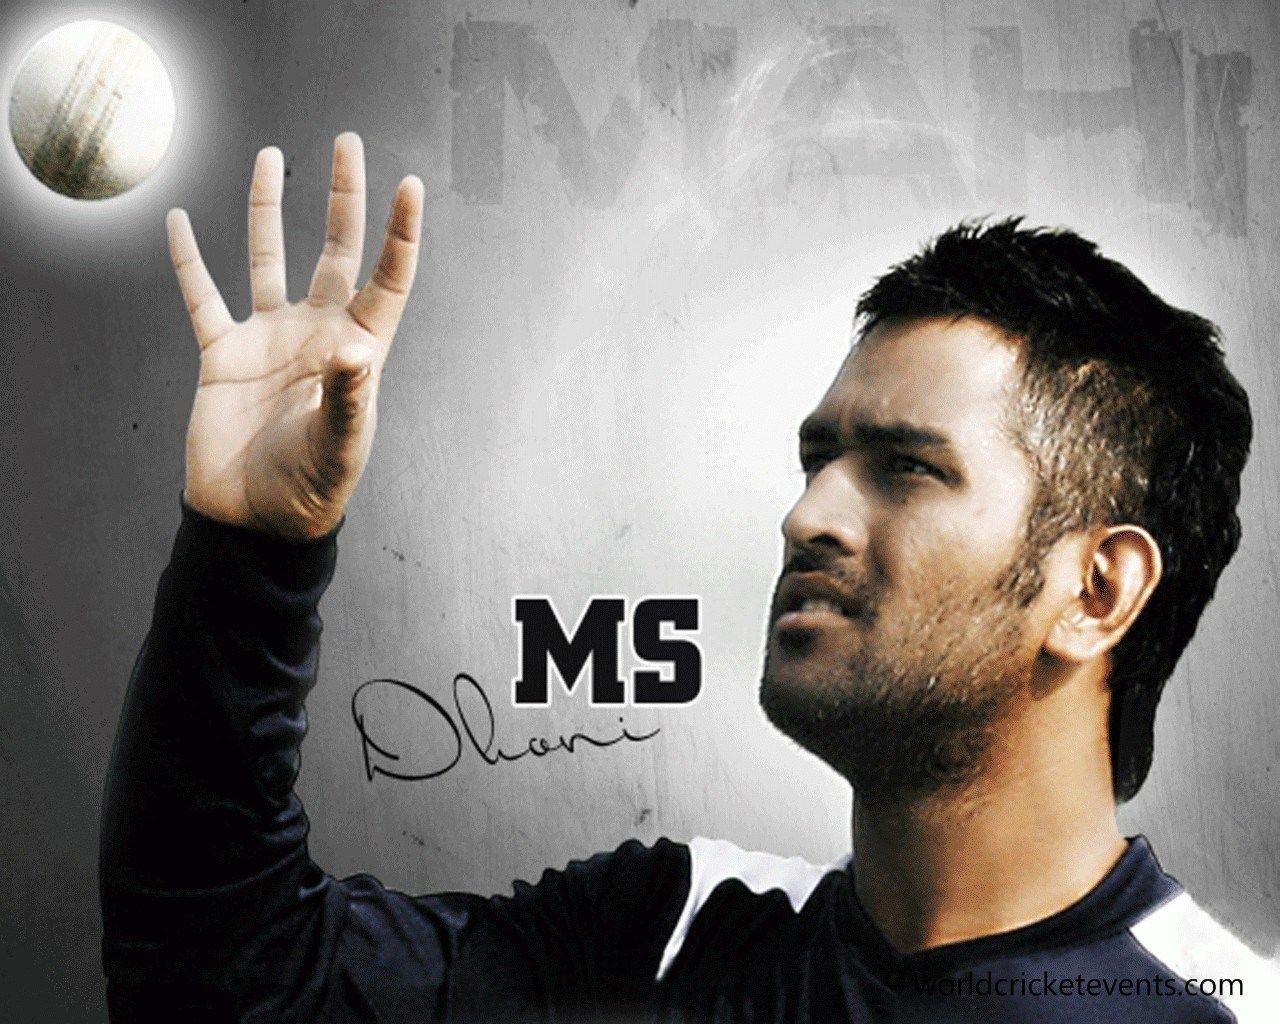 MS Dhoni Free hd Wallpapers For Desktop http://worldcricketevents